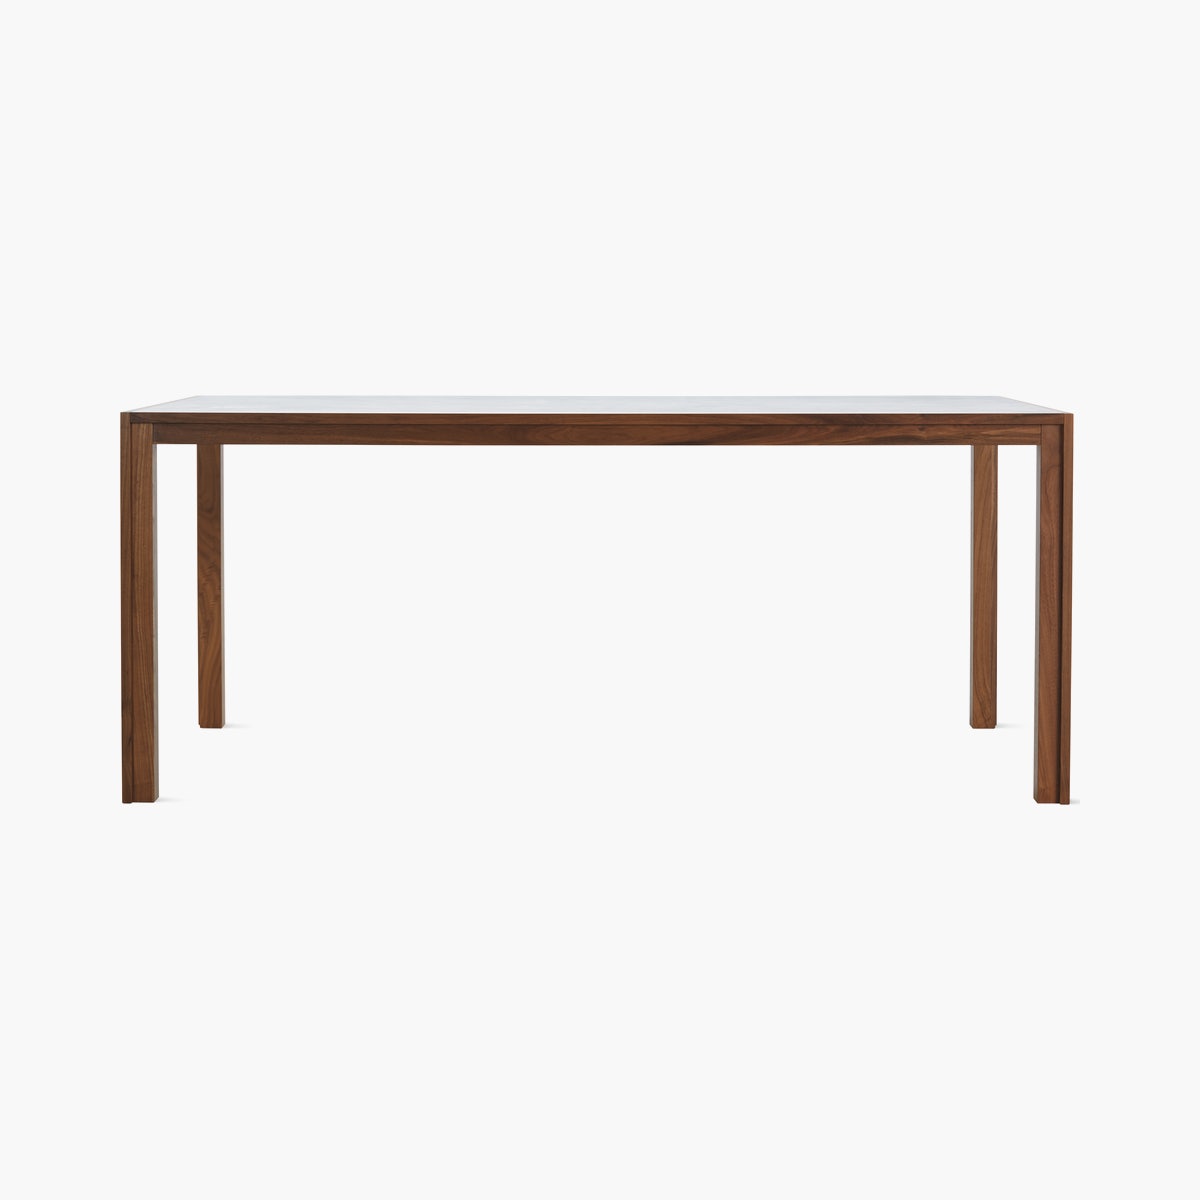 Doubleframe™ Table